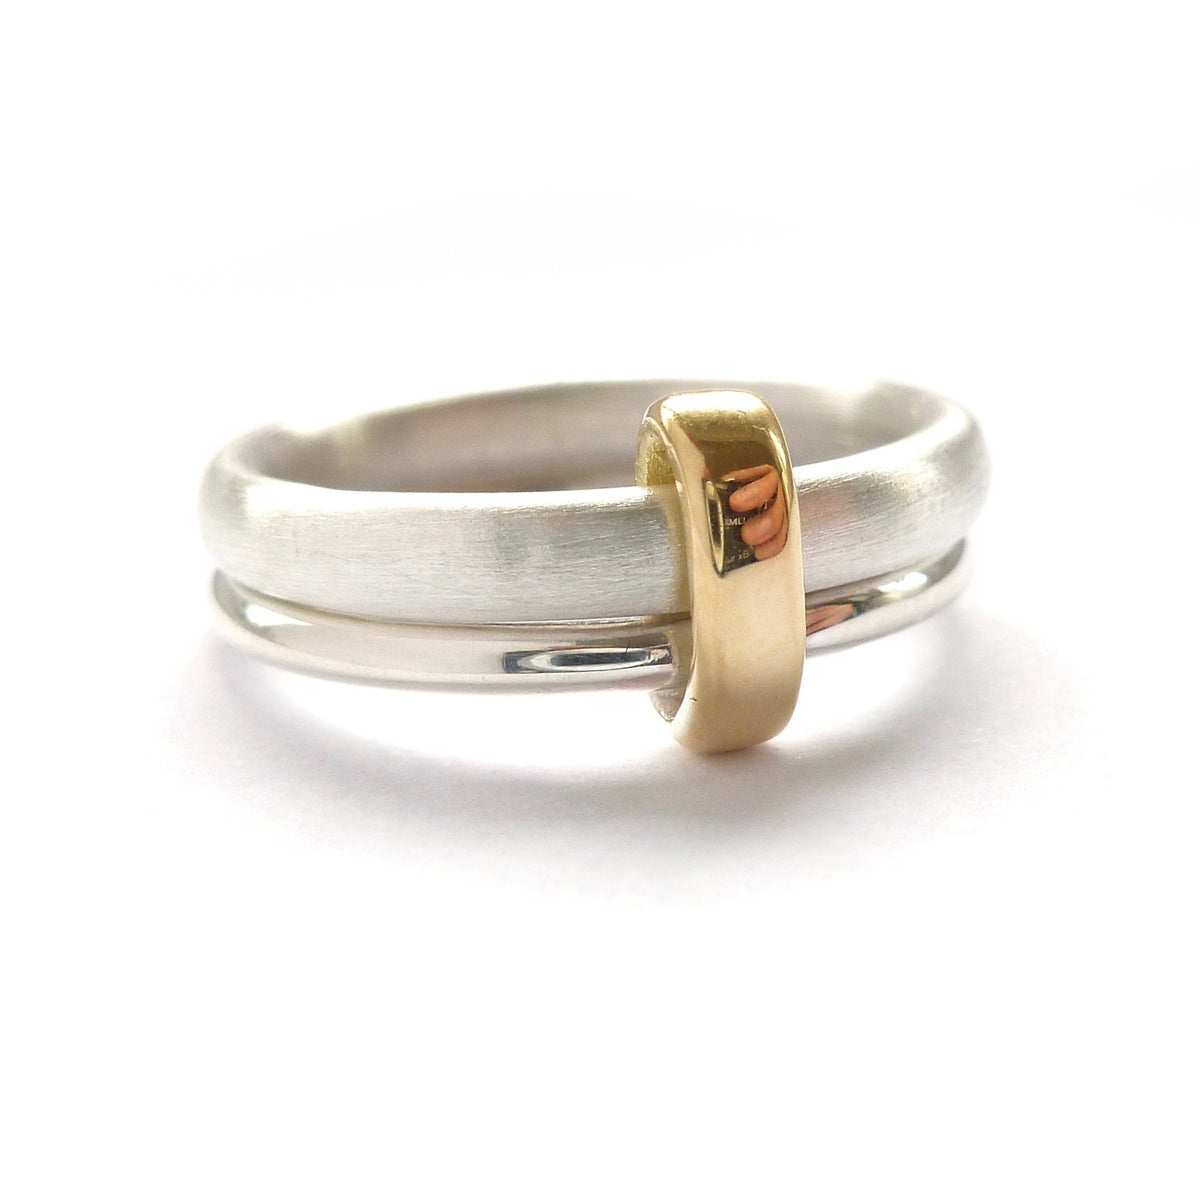 Silver and 18ct gold ring - contemporary, unique and bespoke